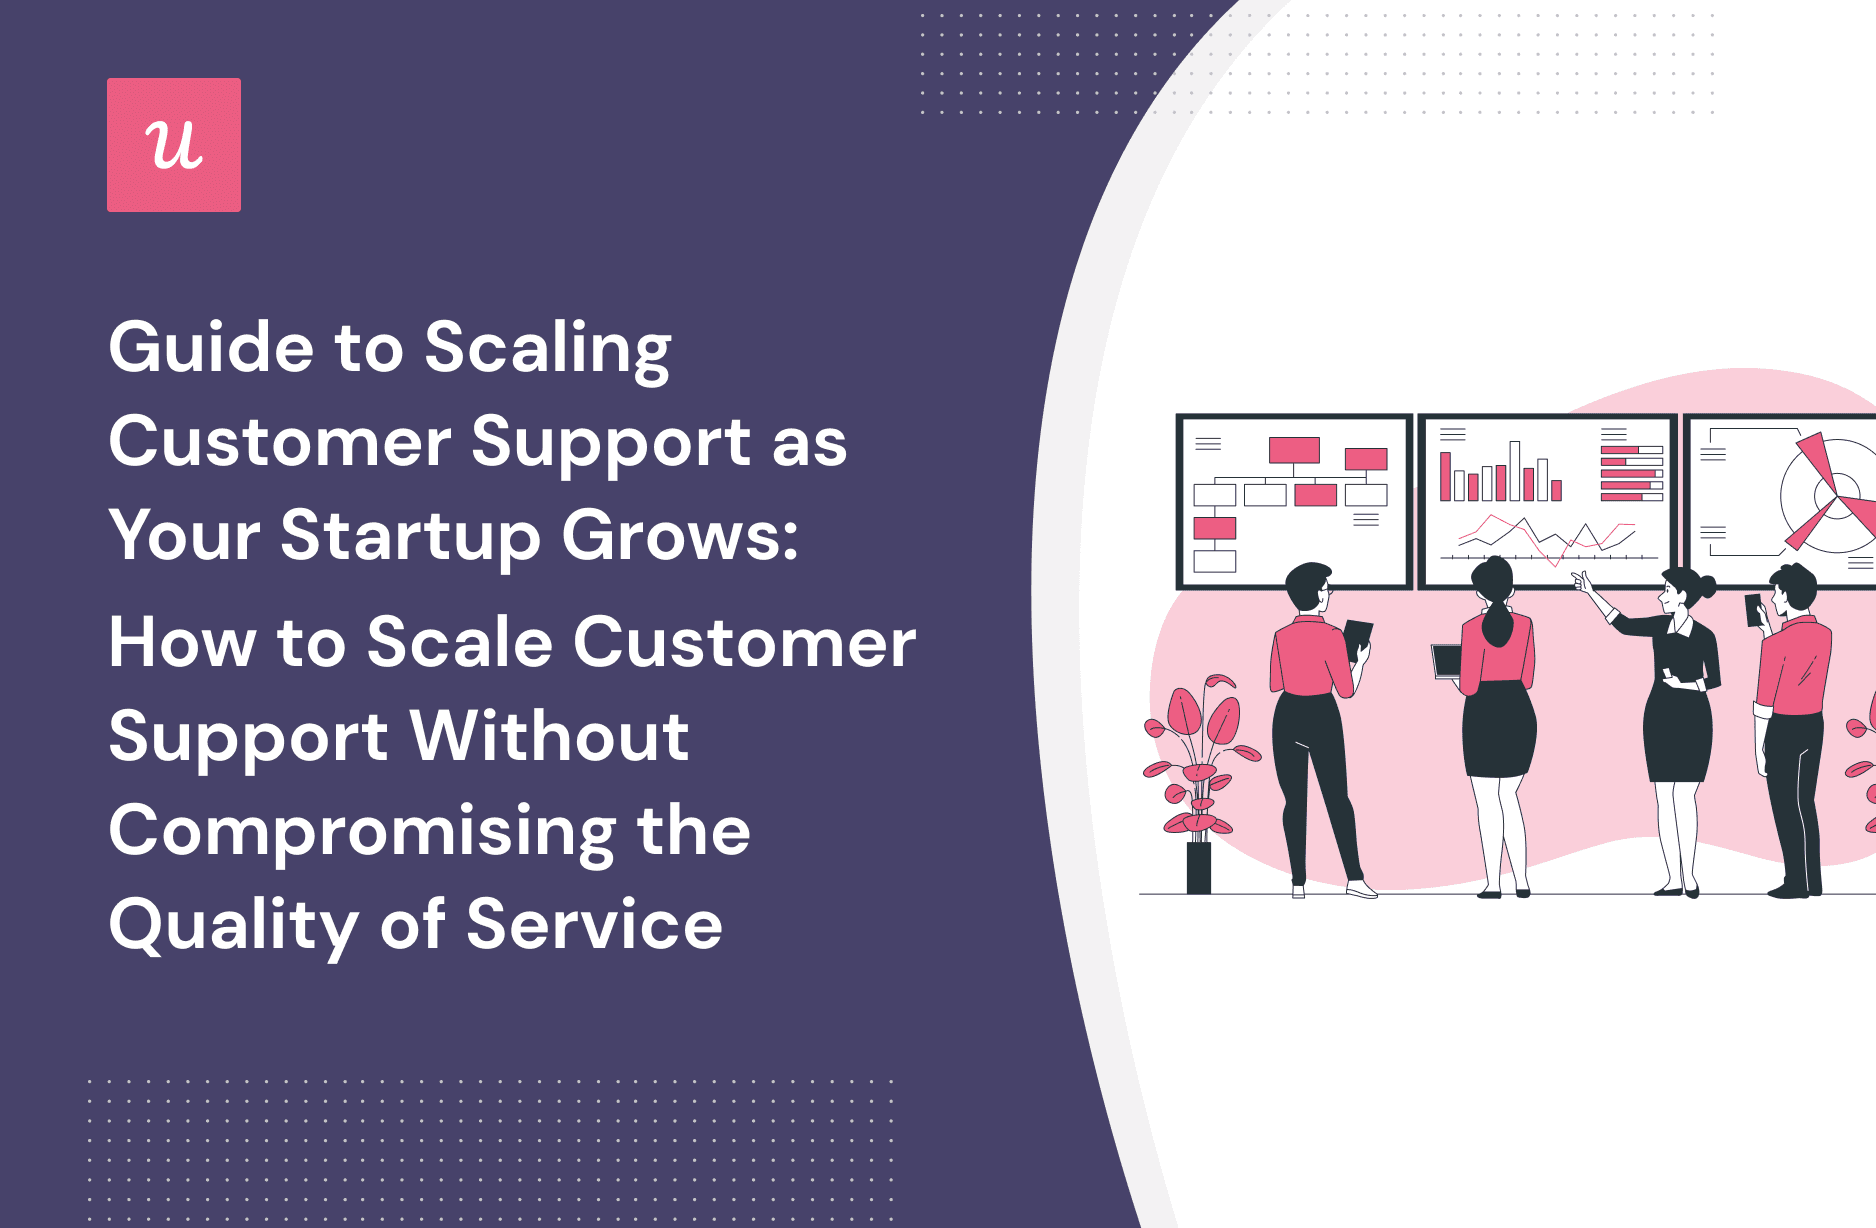 Guide to Scaling Customer Support as Your Startup Grows: How to Scale Customer Support Without Compromising the Quality of Service cover